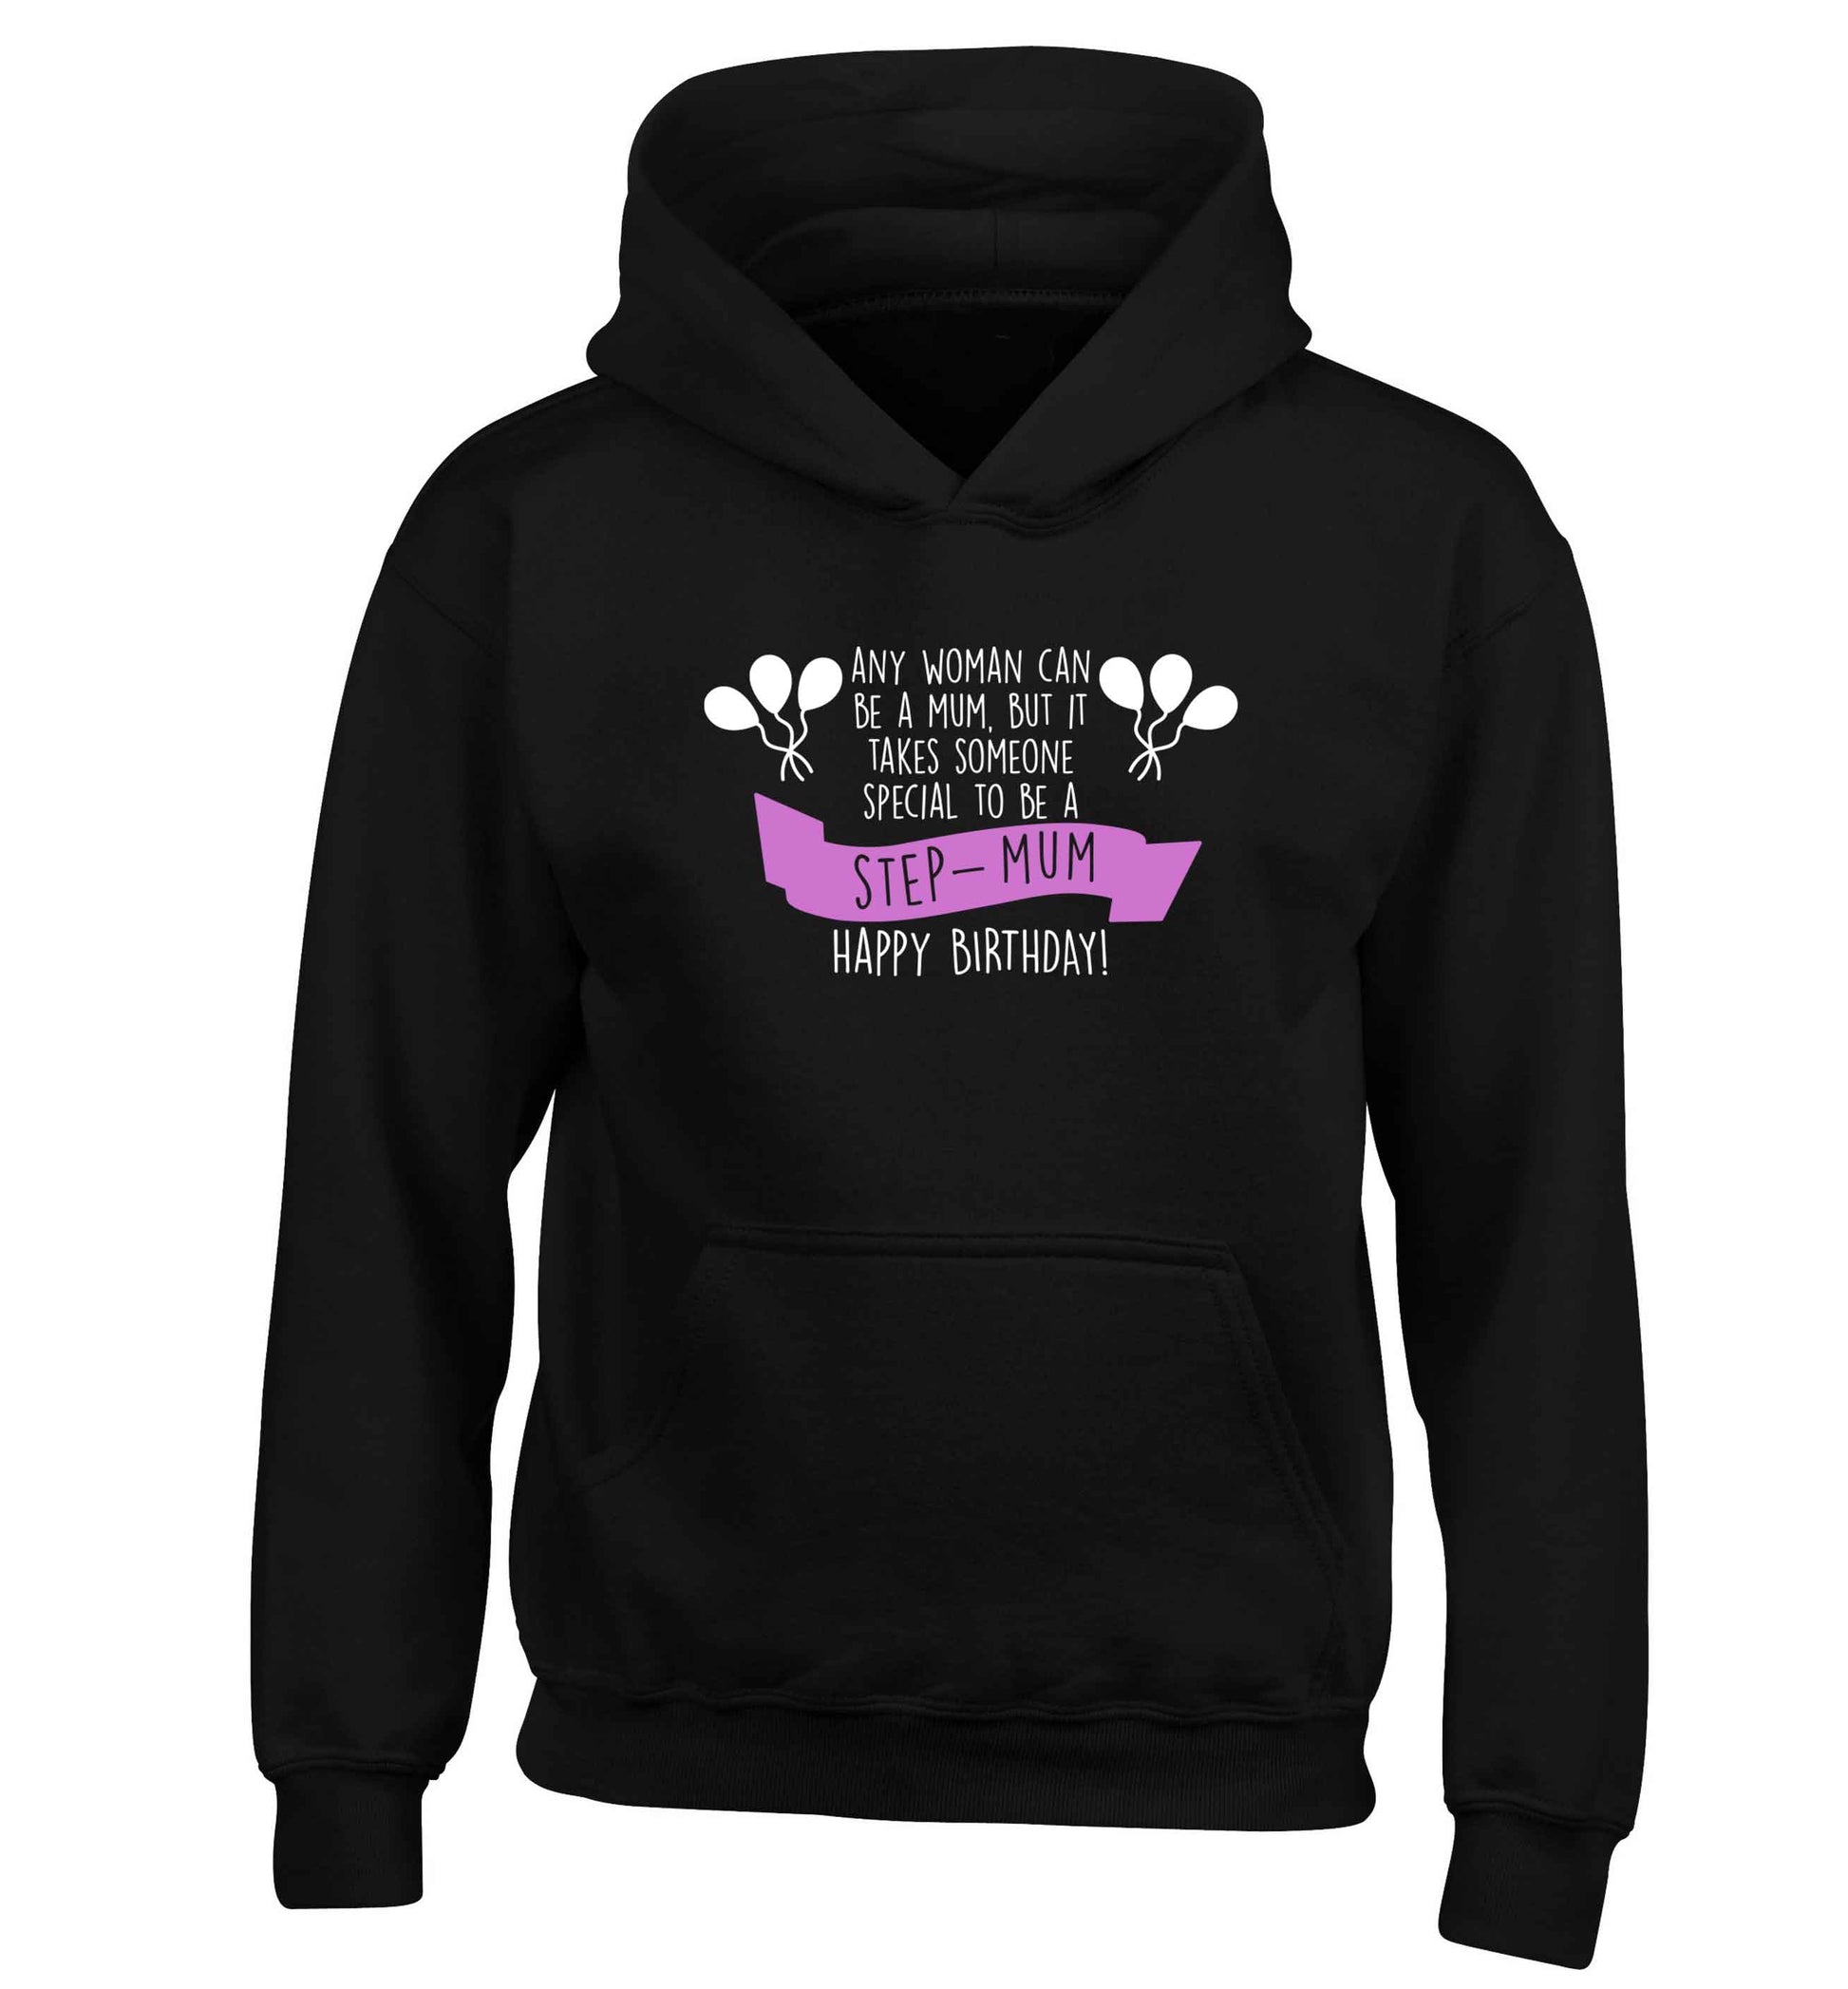 Takes someone special to be a step-mum, happy birthday! children's black hoodie 12-13 Years